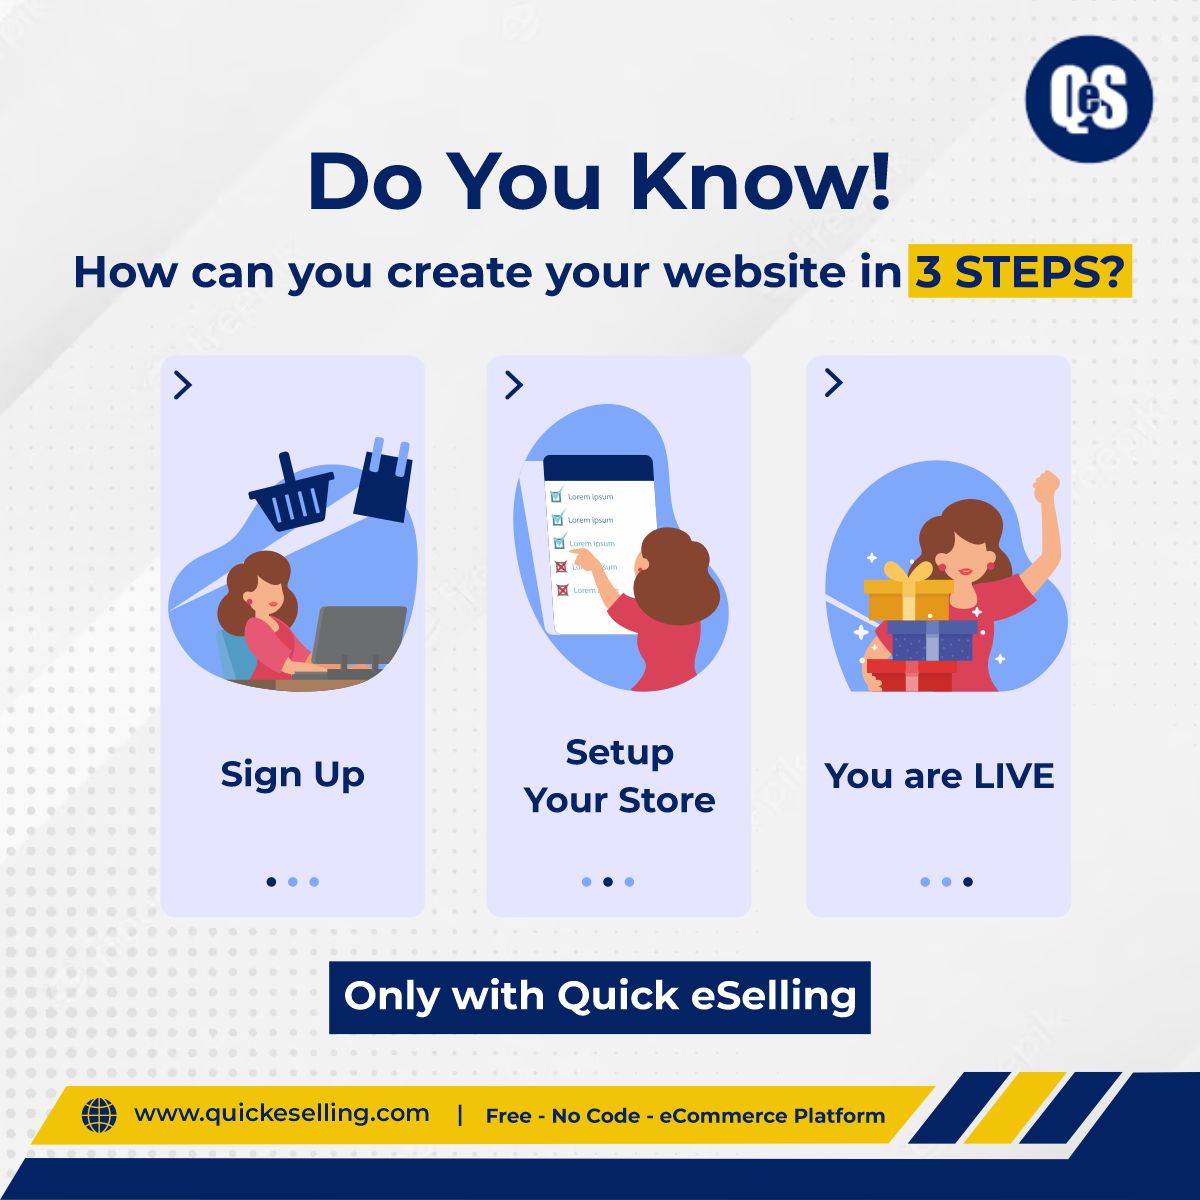 Did you know that you can create your own website in just 3 easy steps with Quick eSelling?

#QuickESelling #CreateYourWebsite #3SimpleSteps #SignUp #SetupYourStore #YouAreLive #OnlineStore #BusinessWebsite #UserFriendlyInterface #CustomizableDesign #PowerfulMarketingTools